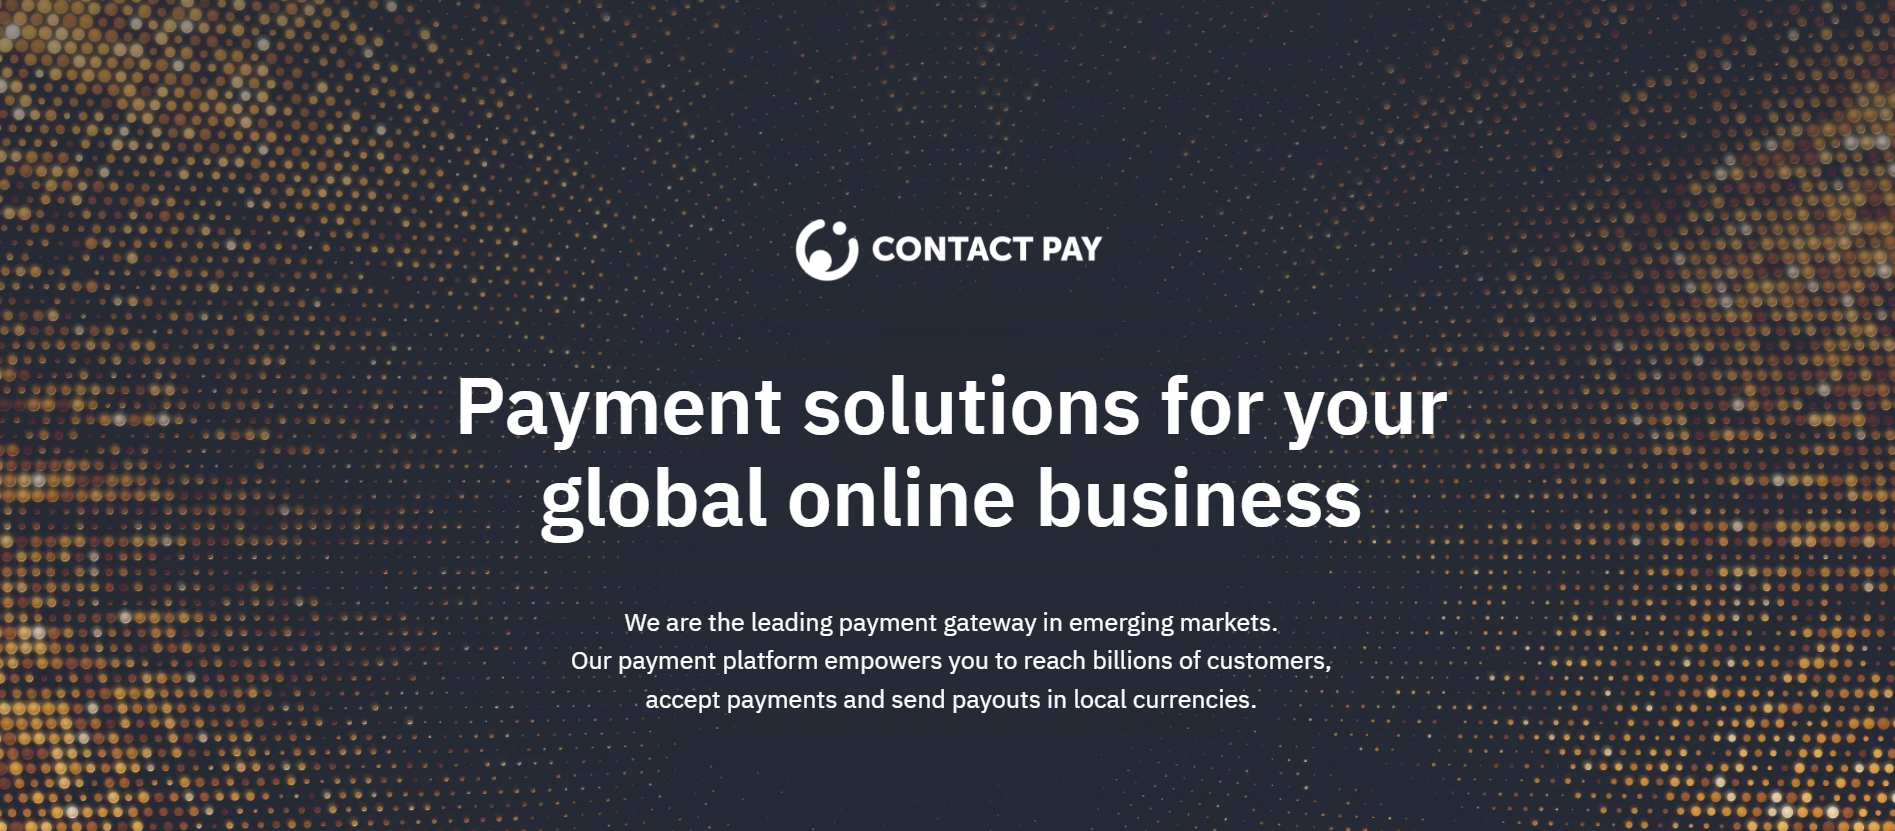 CONTACT PAY